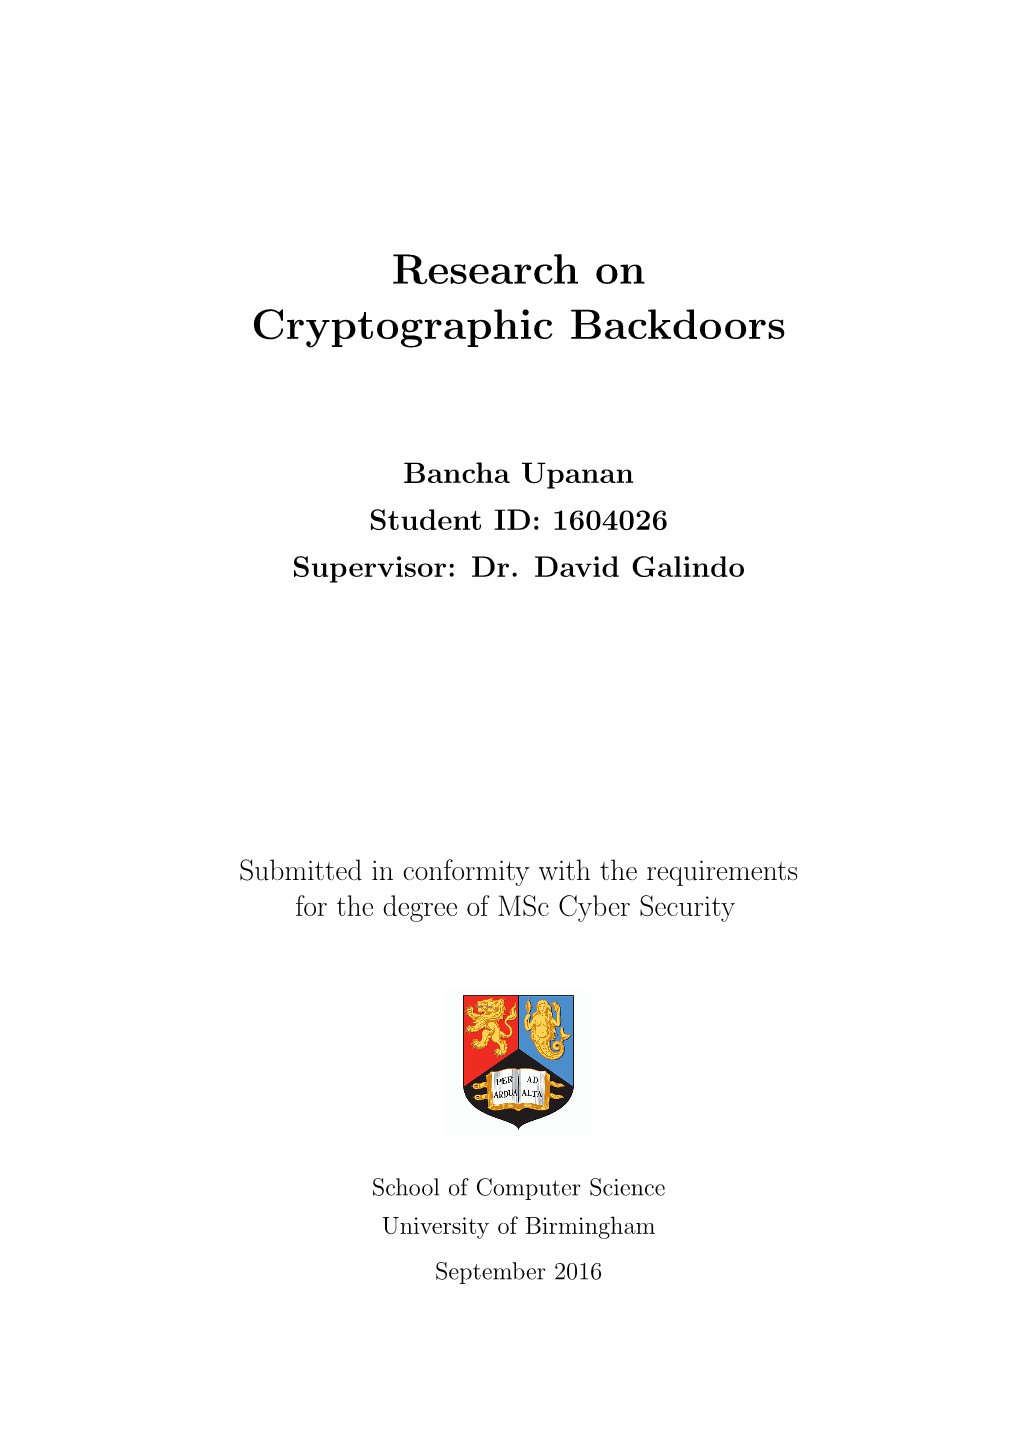 Research on Cryptographic Backdoors